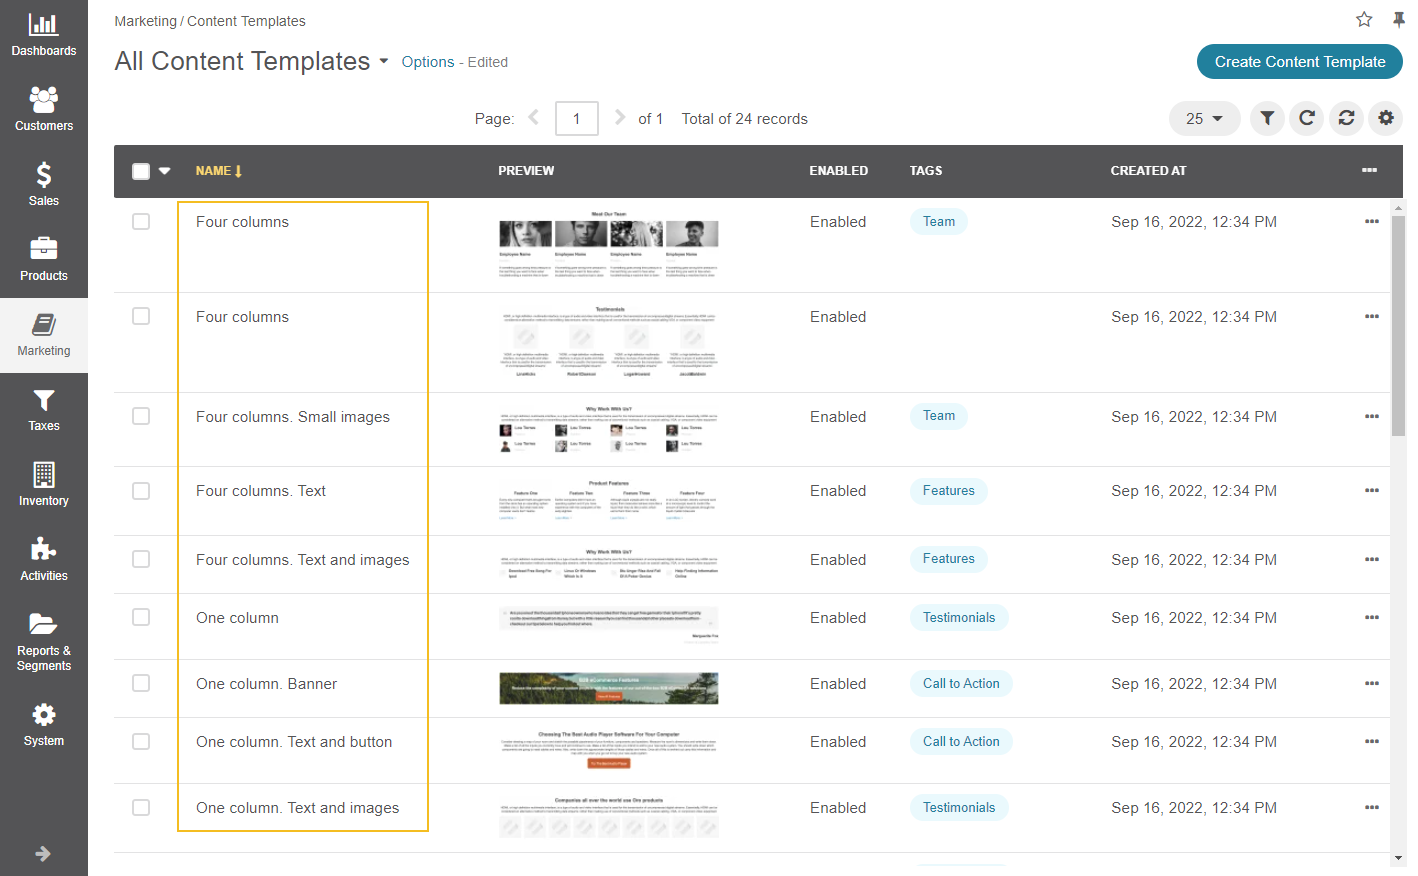 The page that lists all content template samples